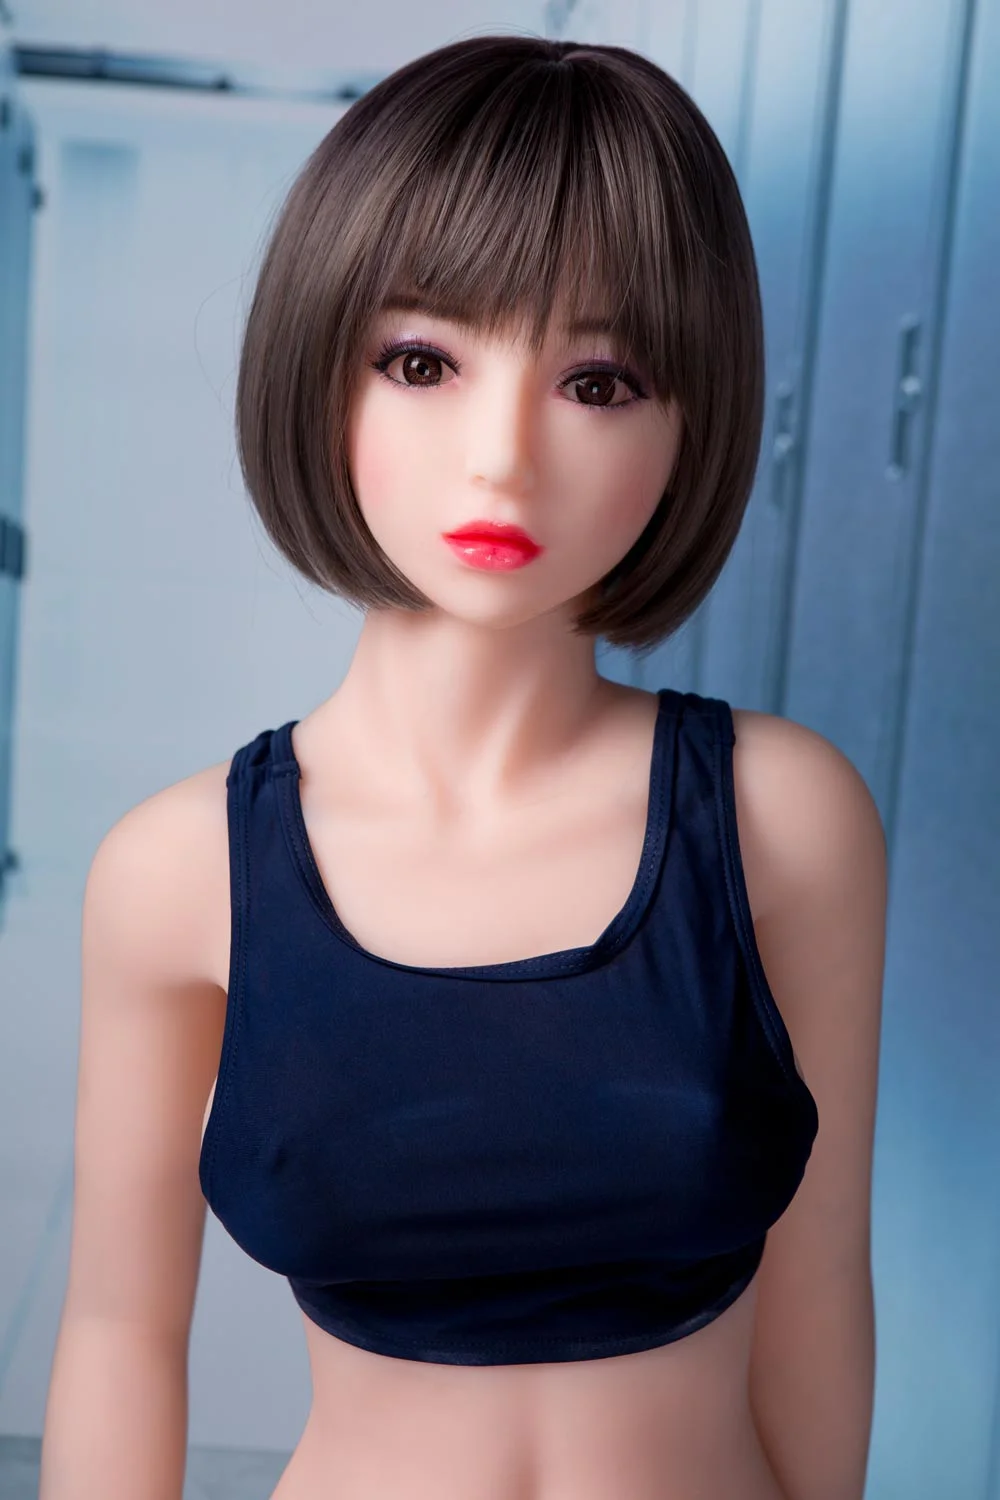 Sex doll with red lips